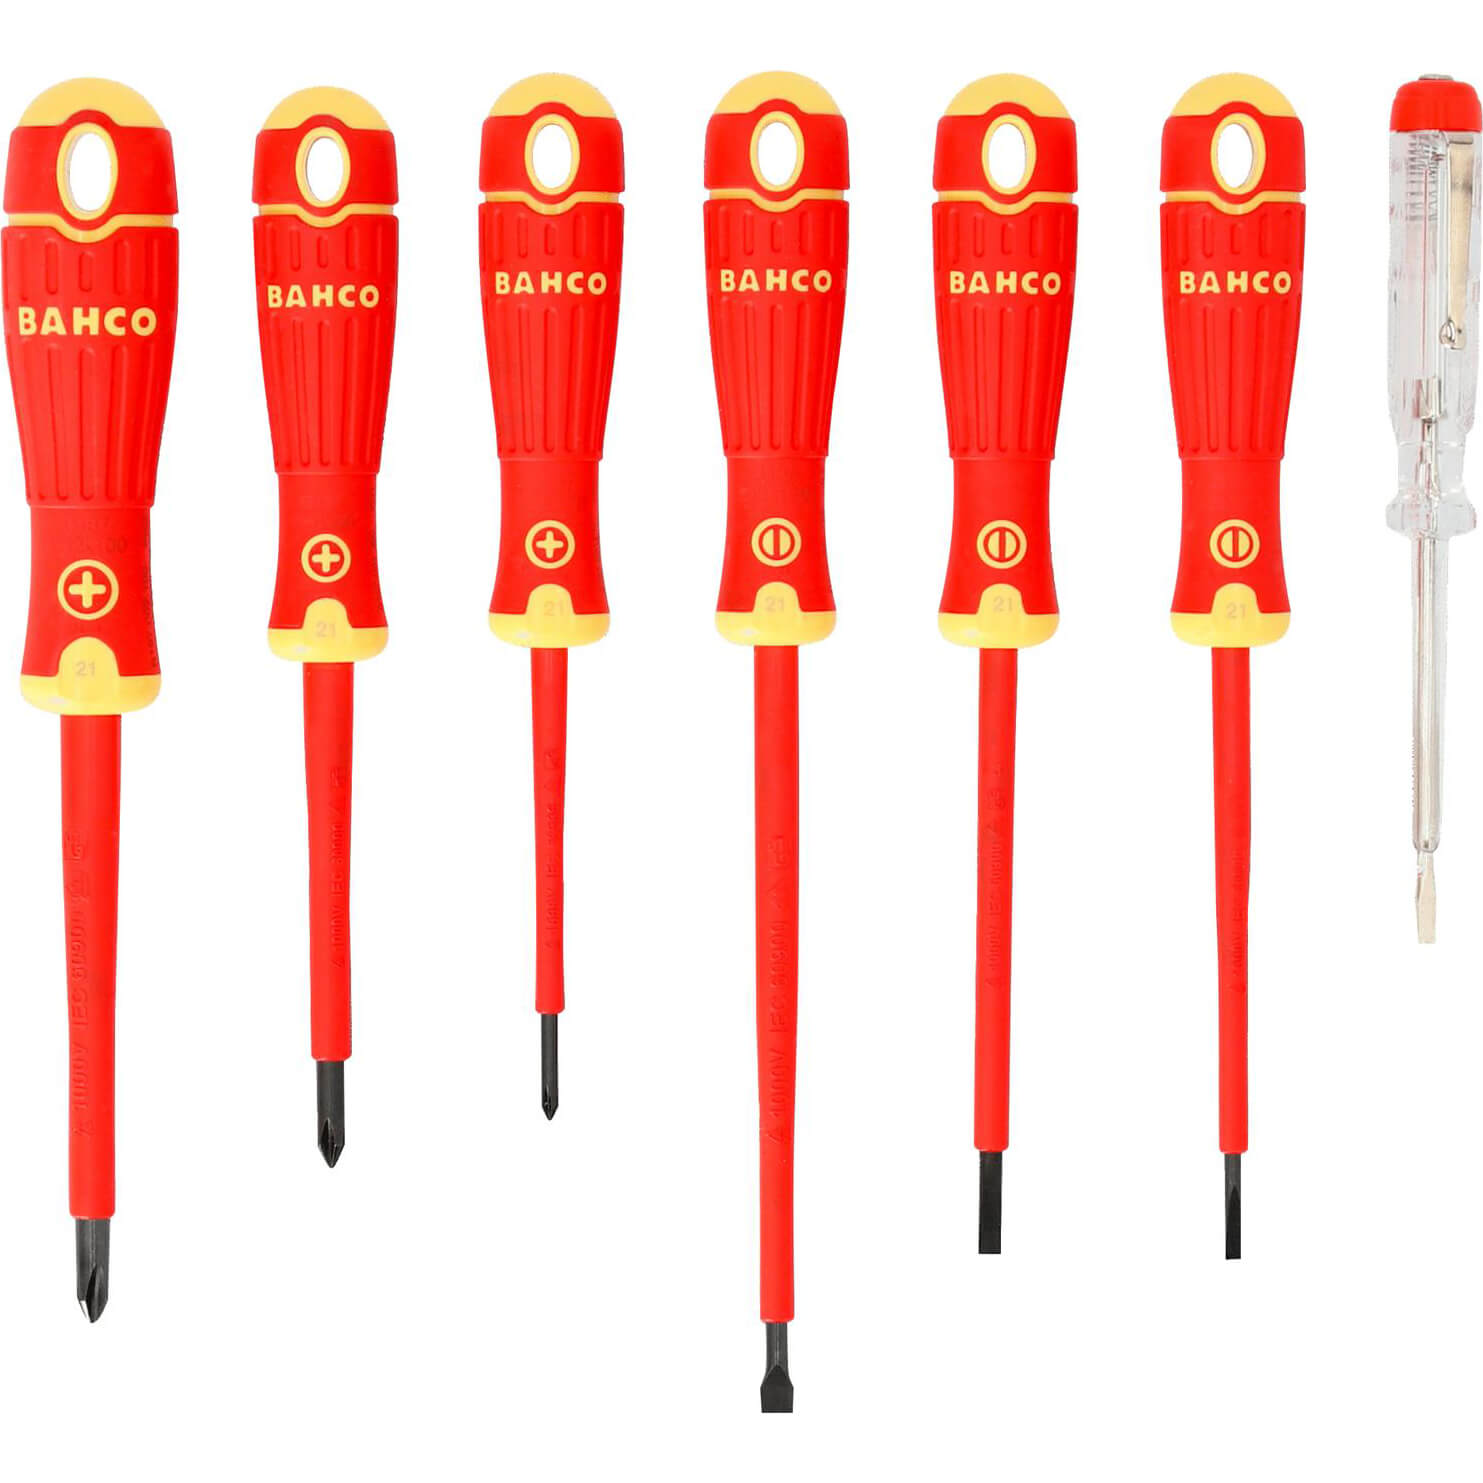 Photo of Bahco 7 Piece Insulated Screwdriver Set And Mains Tester